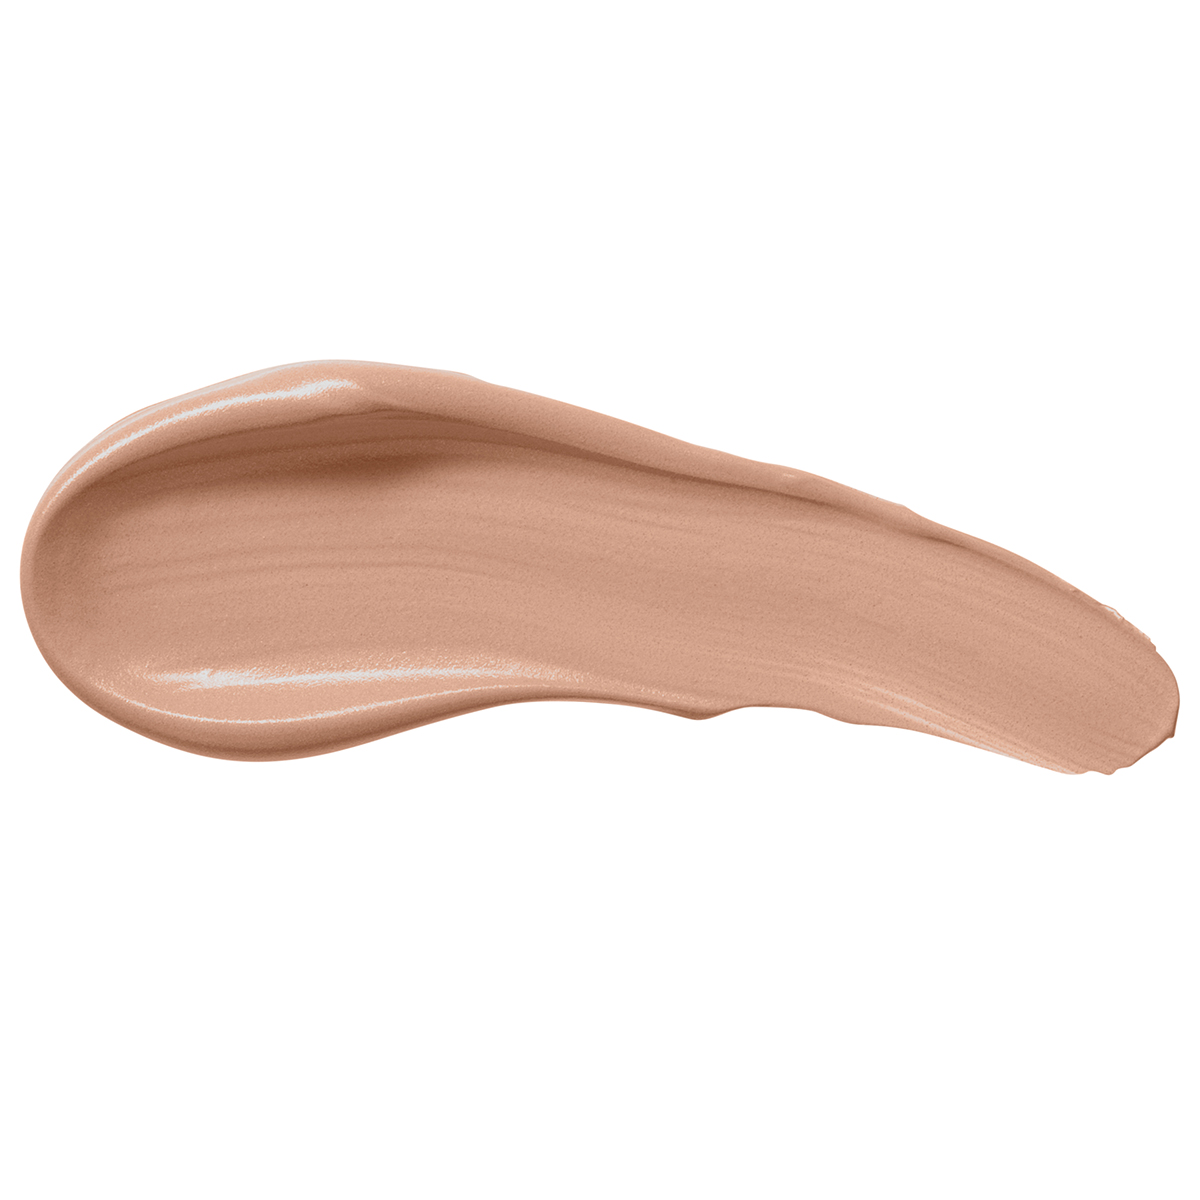 Pur 4-in-1 Mineral Tinted Moisturizer LP3